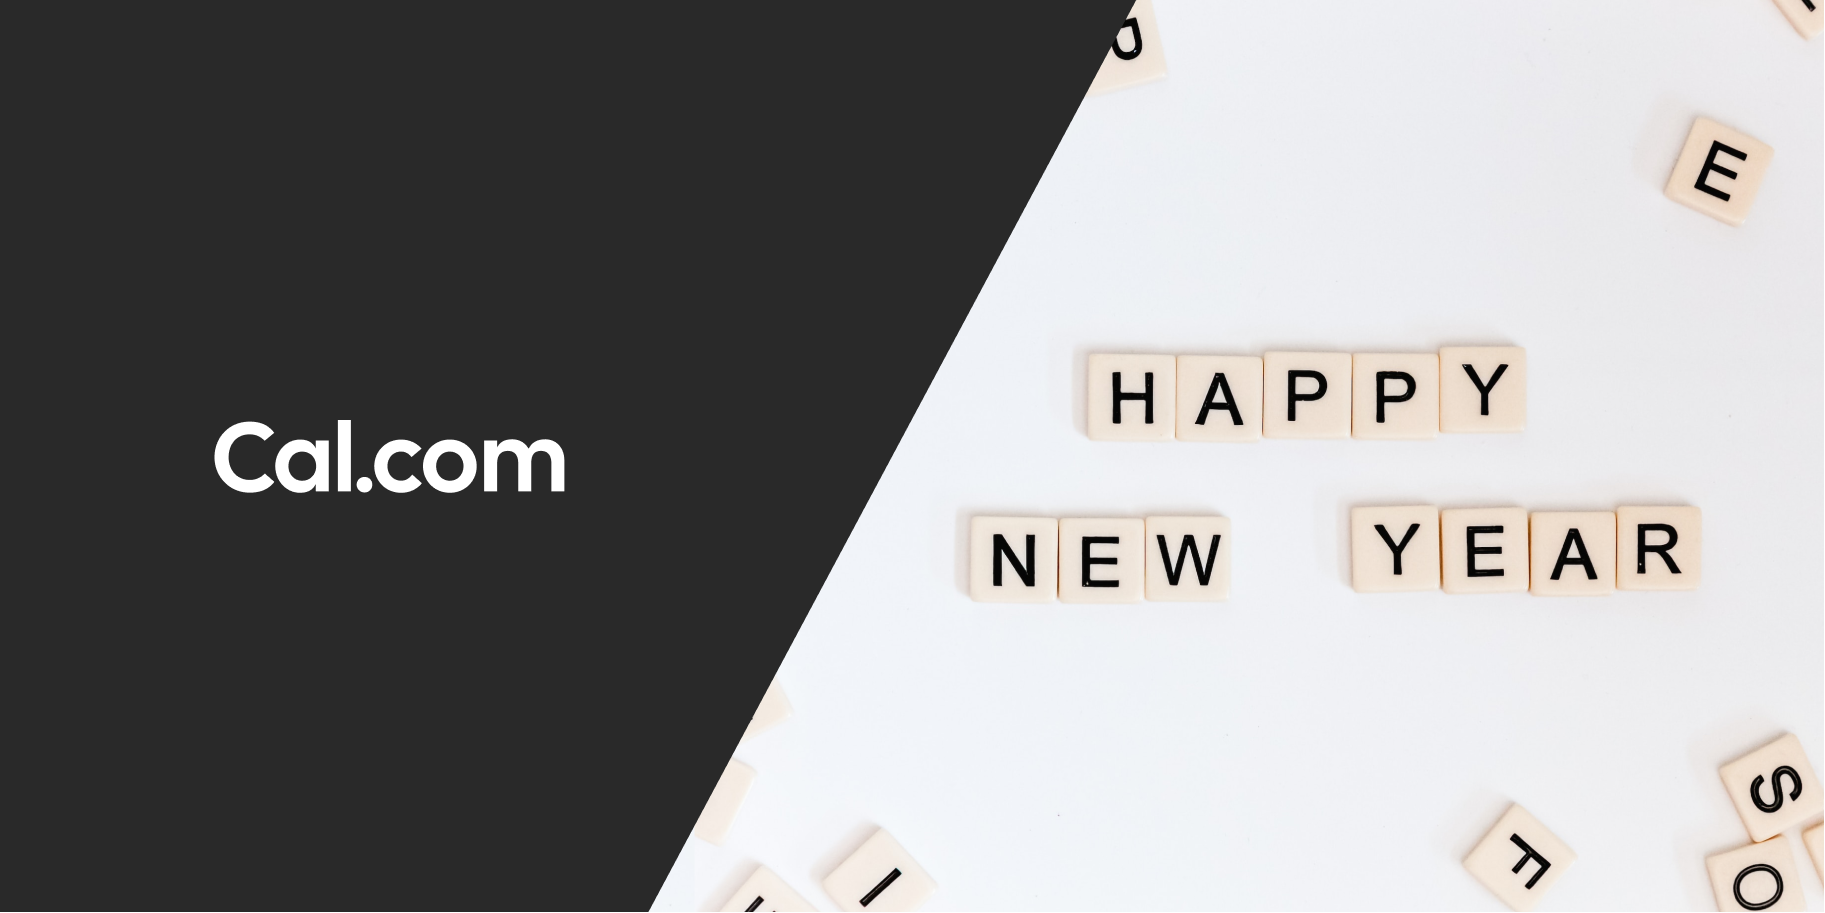 Three reasons to use Cal.com in the new year